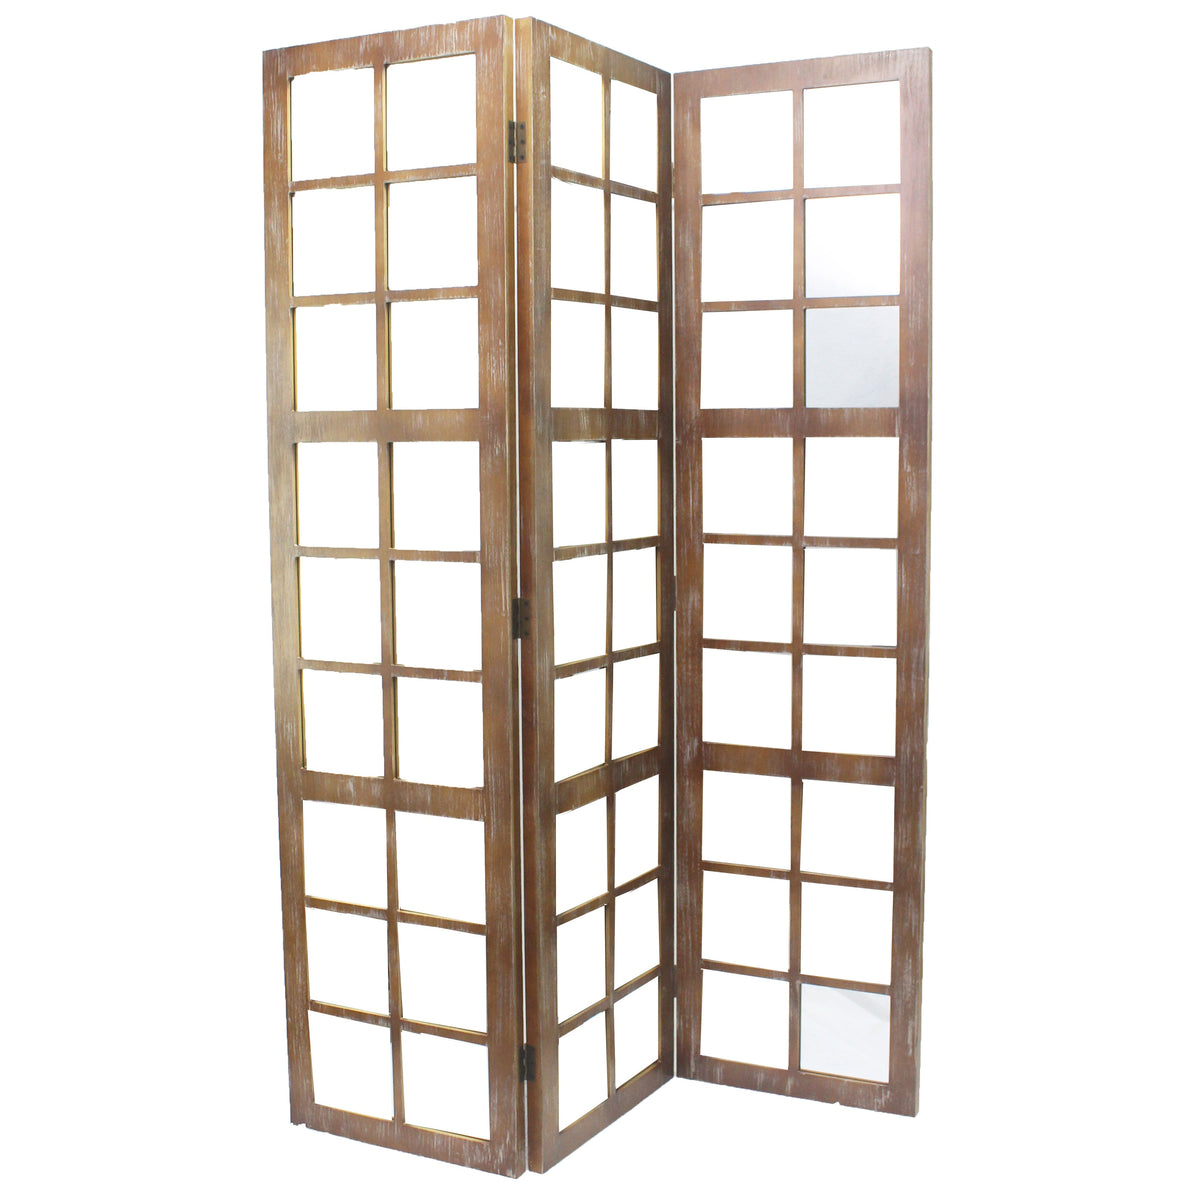 3 Panel Wooden Screen with Square Mirror Inserts, Brown and Silver - BM205400